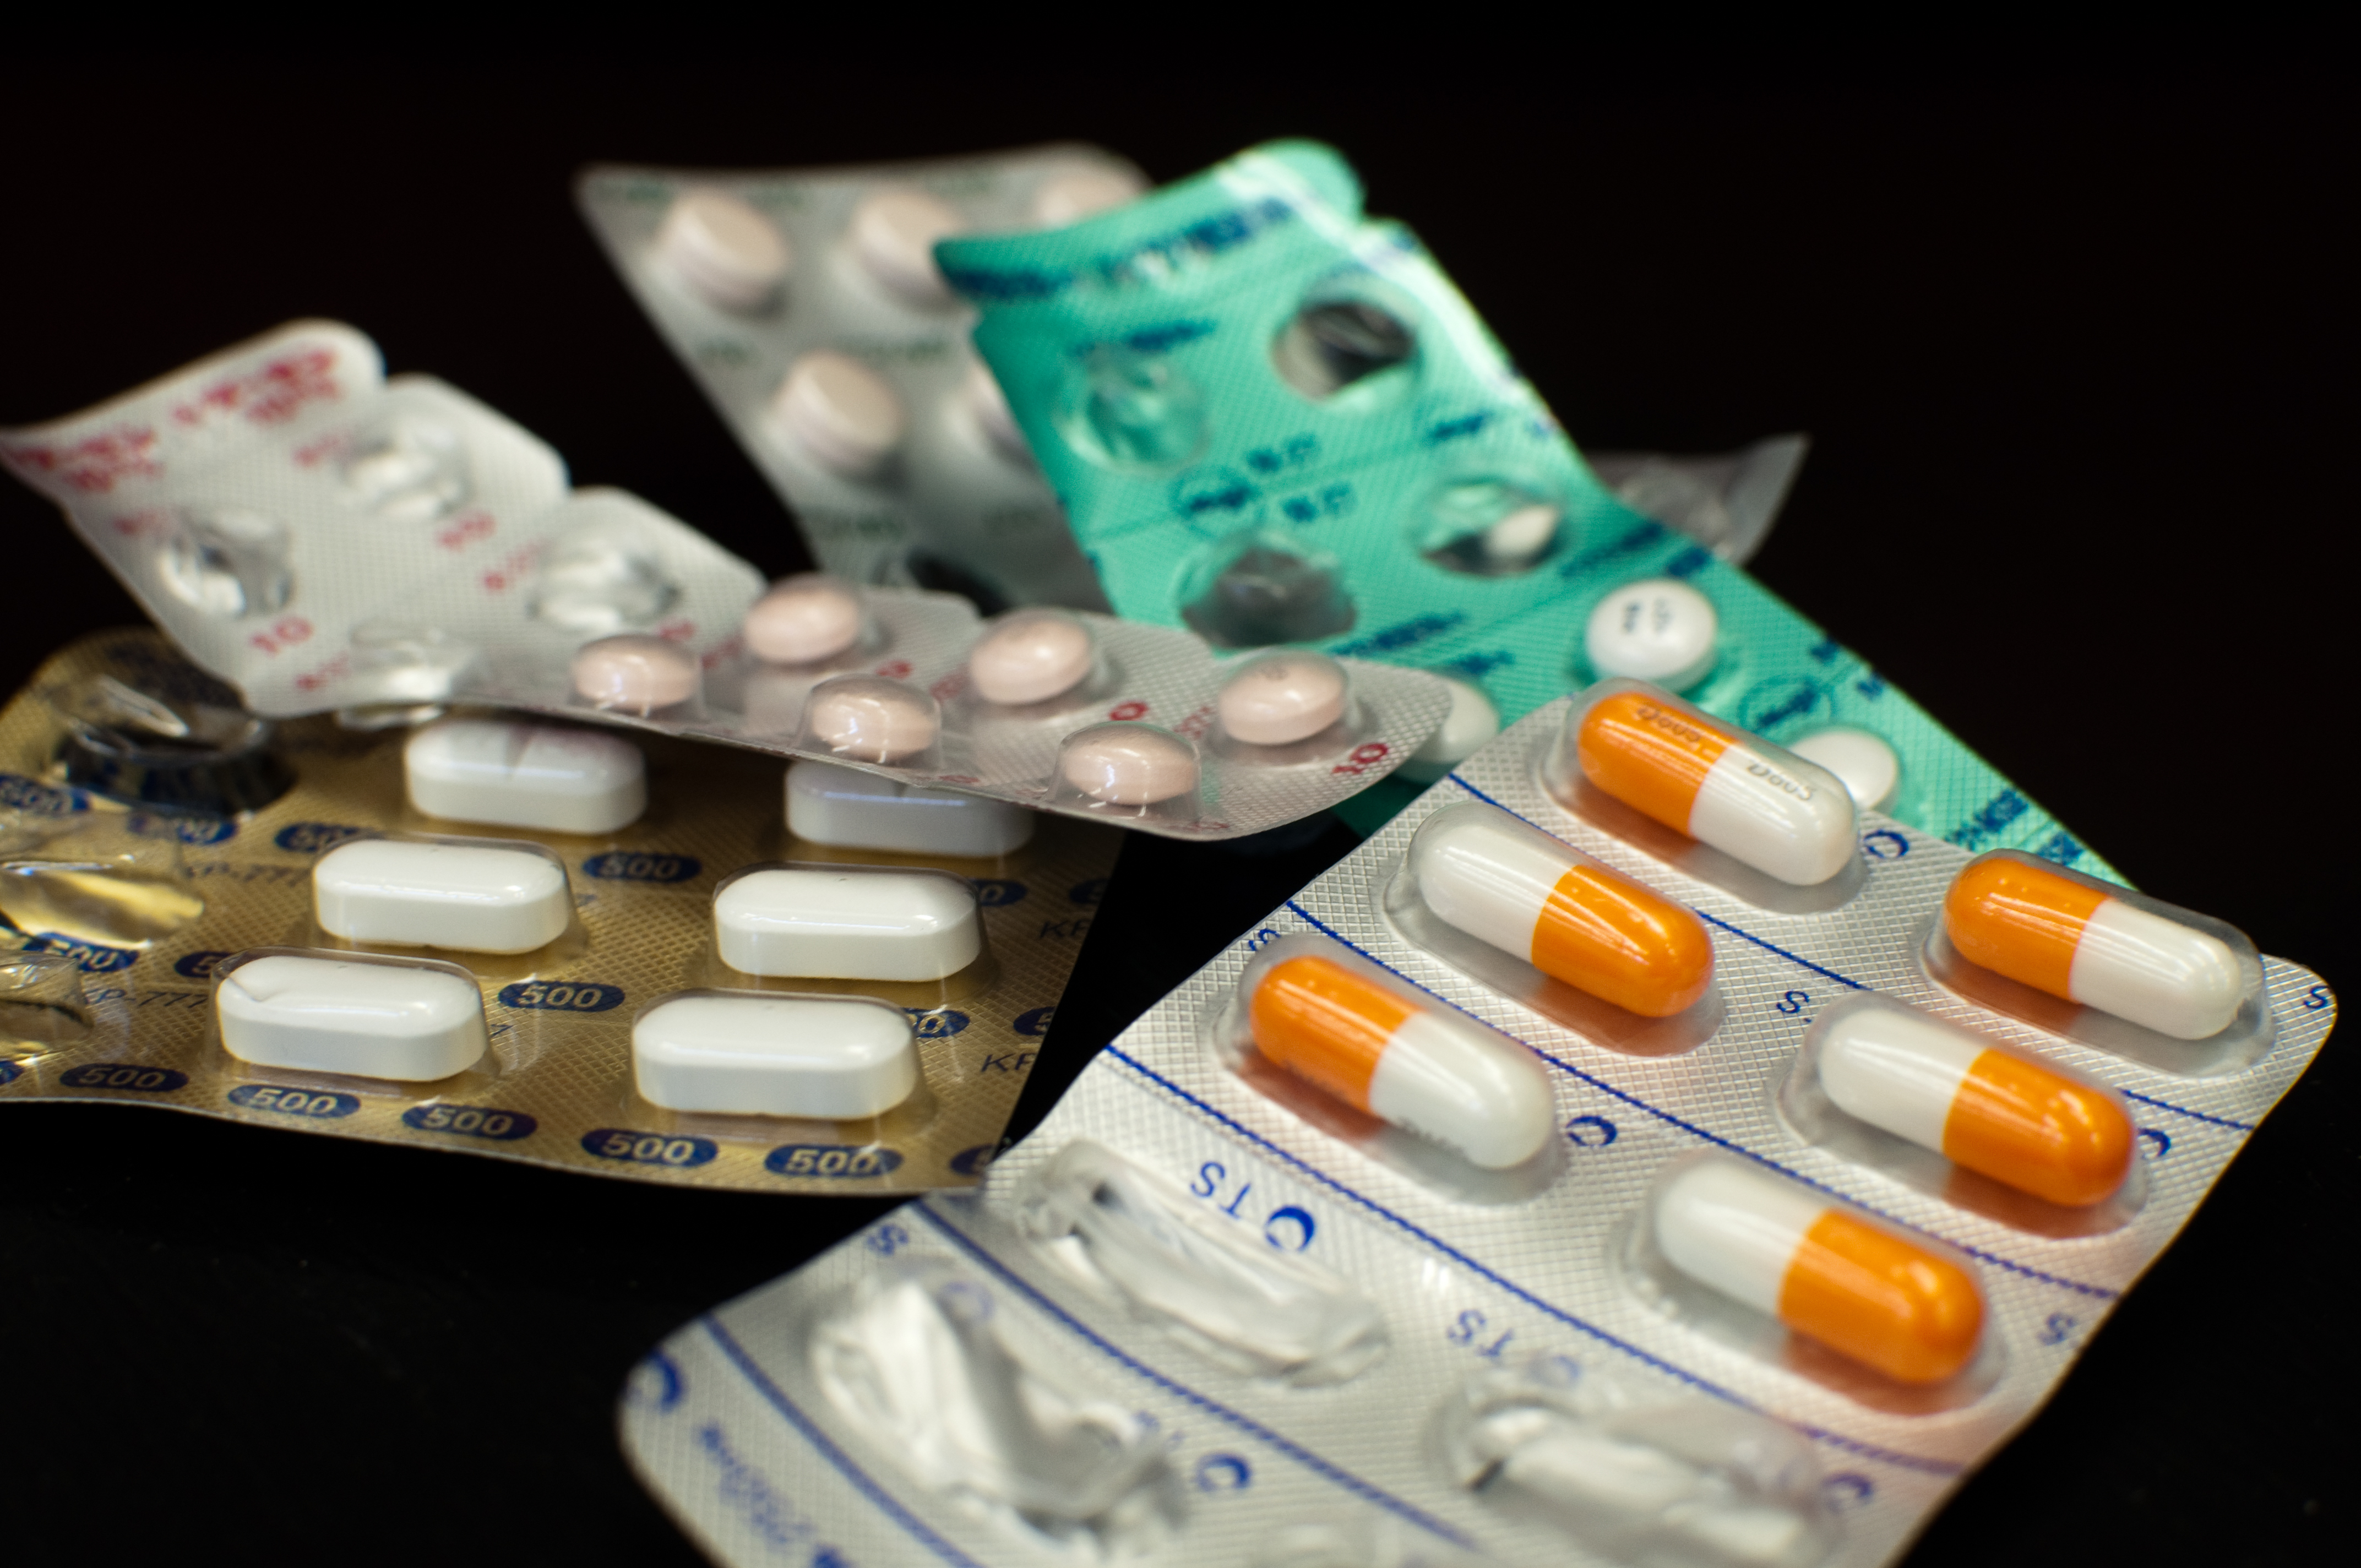 Antidepressants to Combat SAD – What Are The Most Commonly Used Drugs?